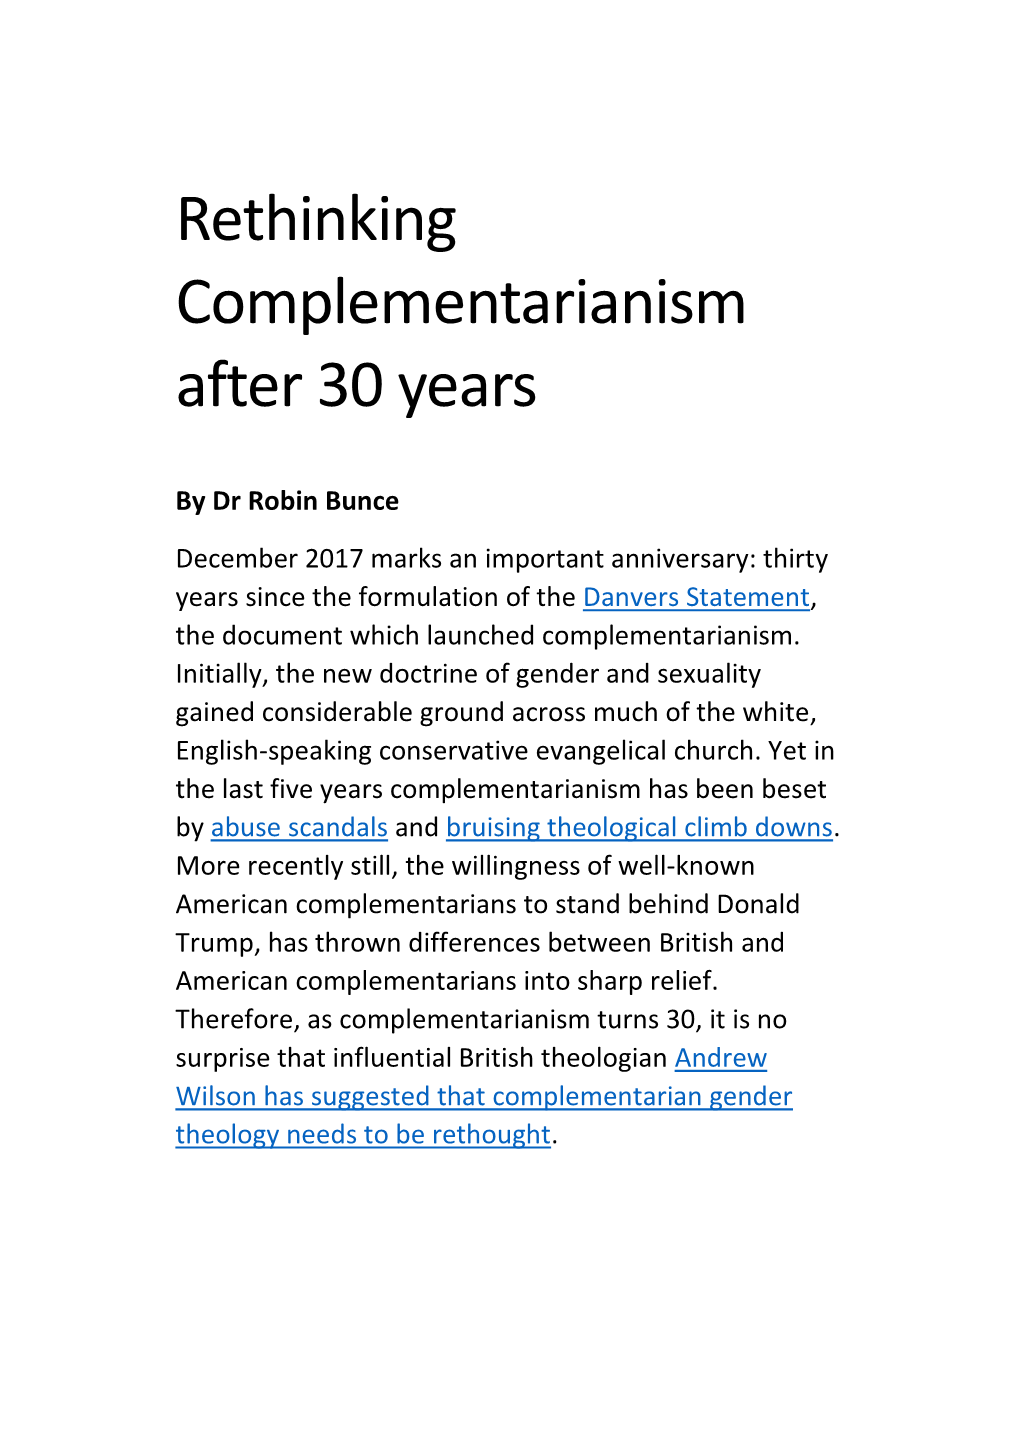 Rethinking Complementarianism After 30 Years